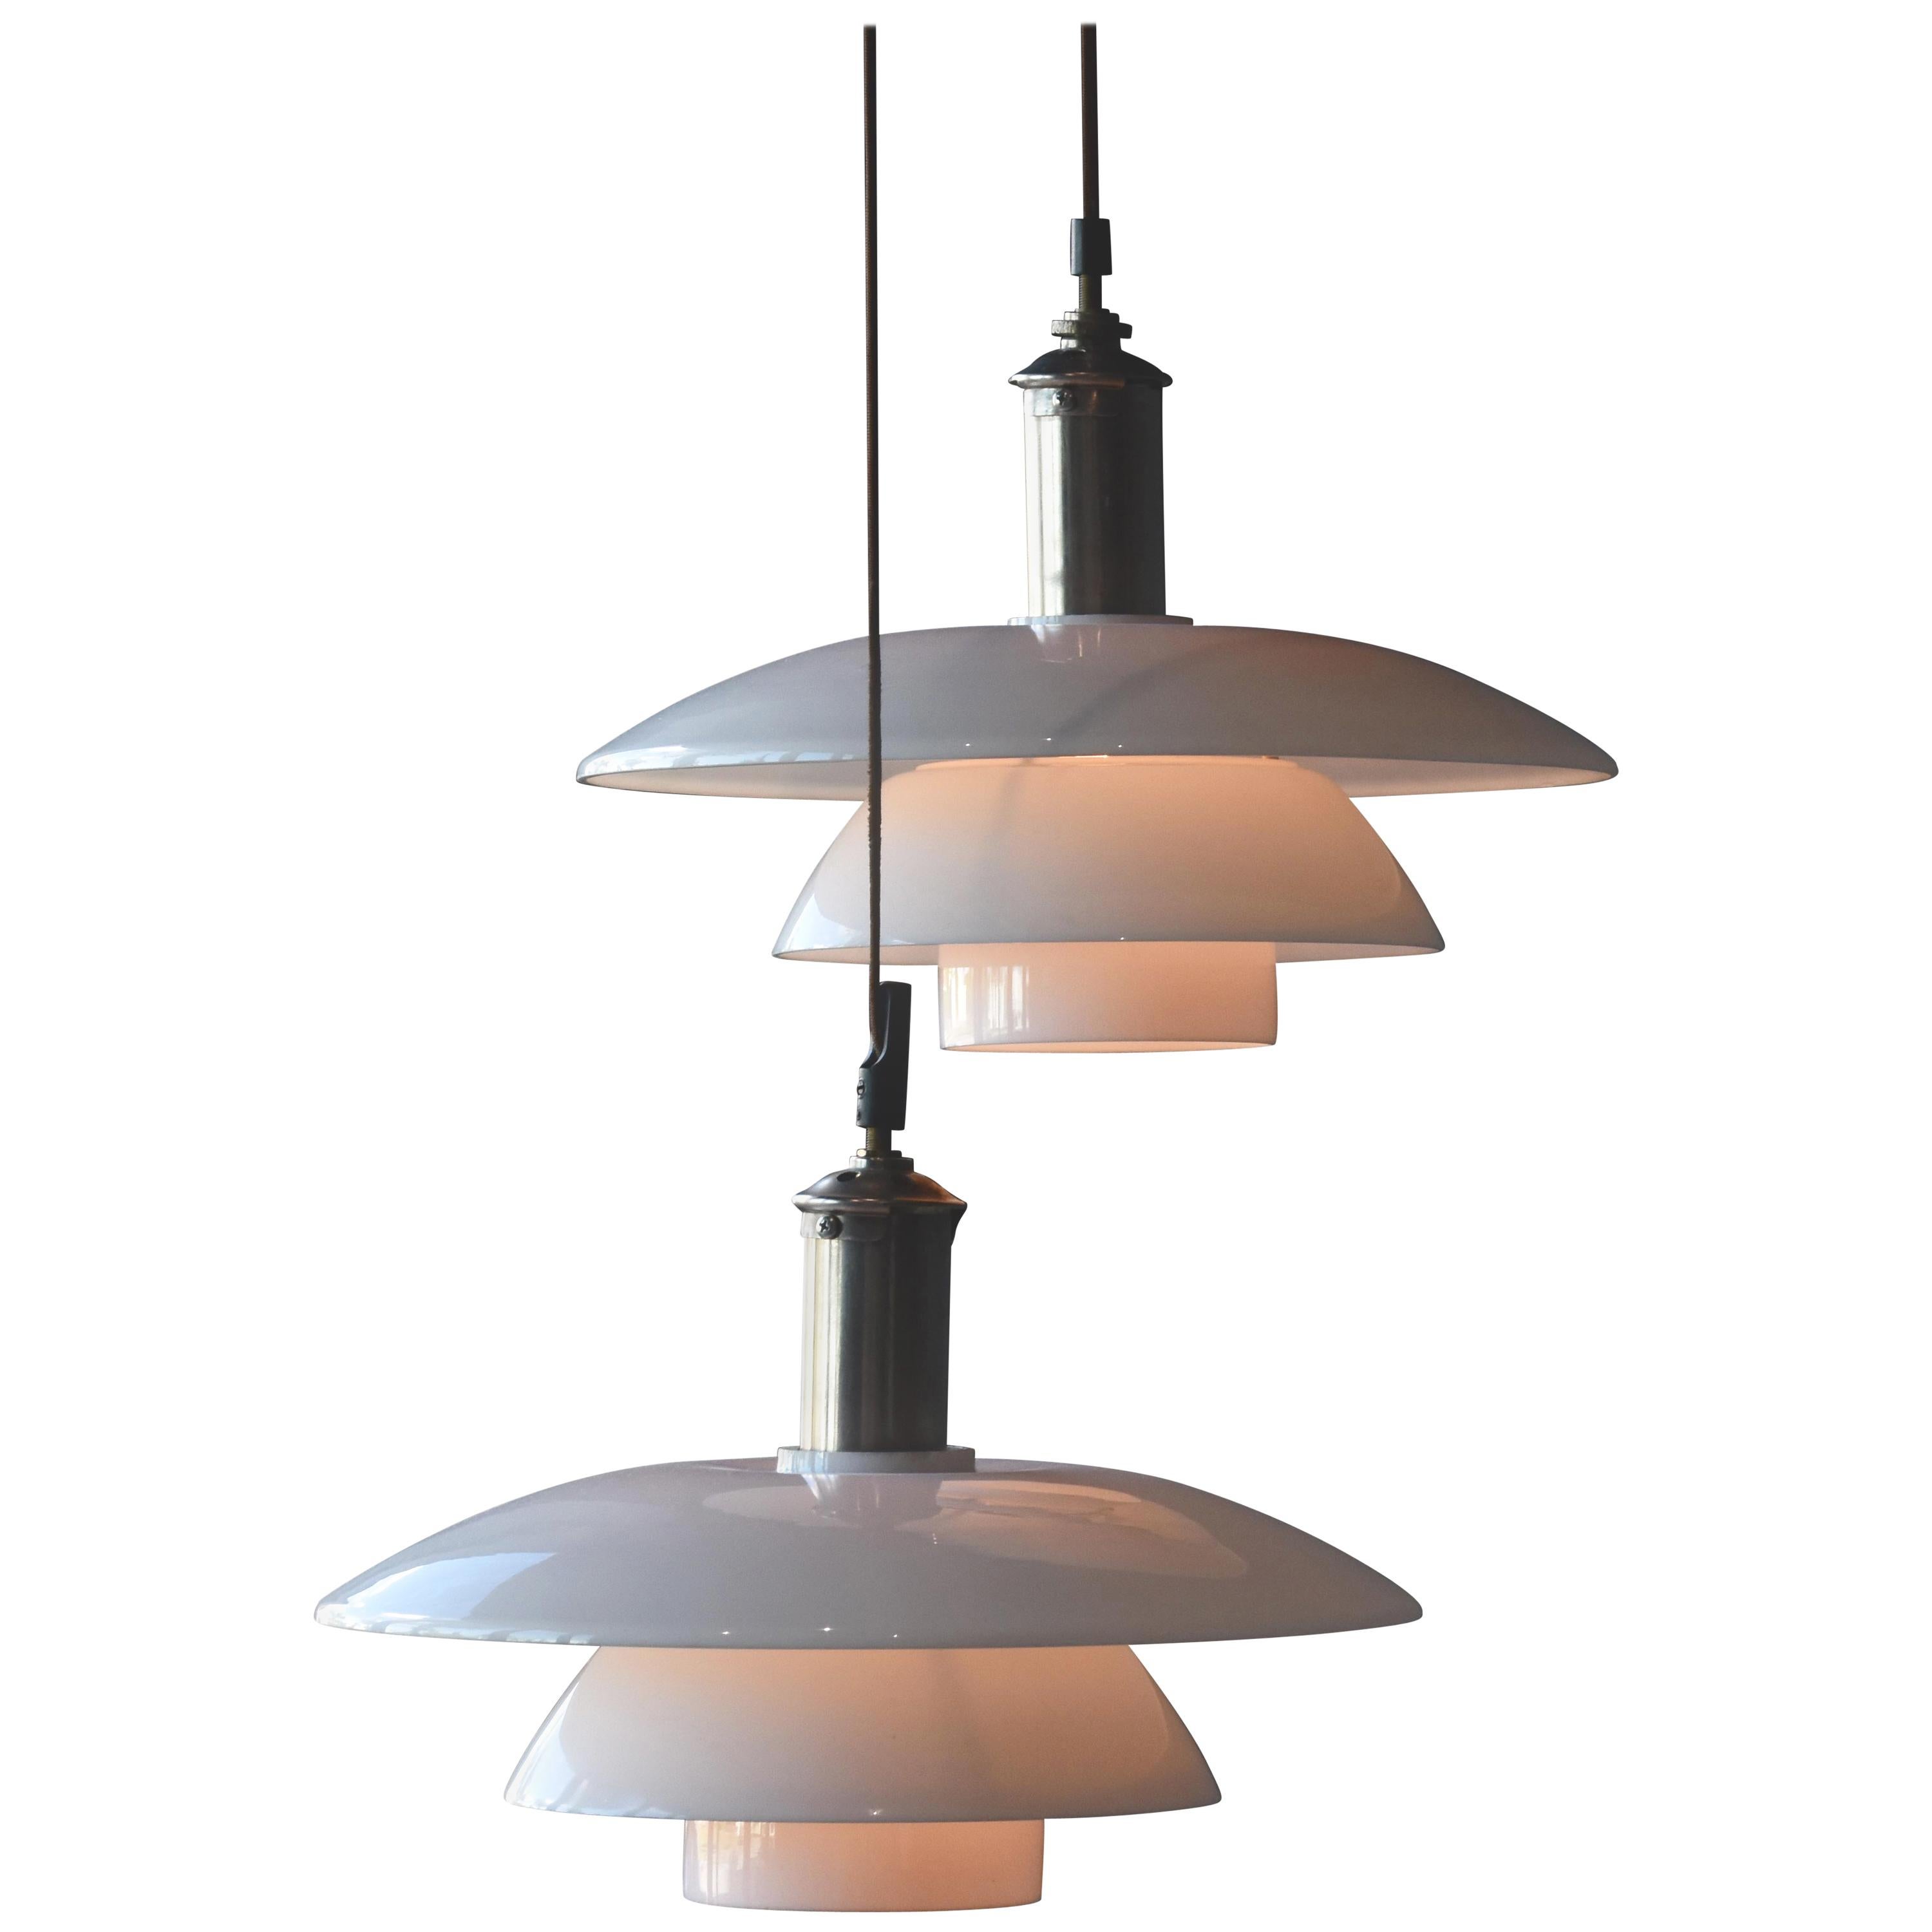 Poul Henningsen, Pair of 4/4 Pendant Lamps, Nickel-Plated Metal, Glass, 1940s